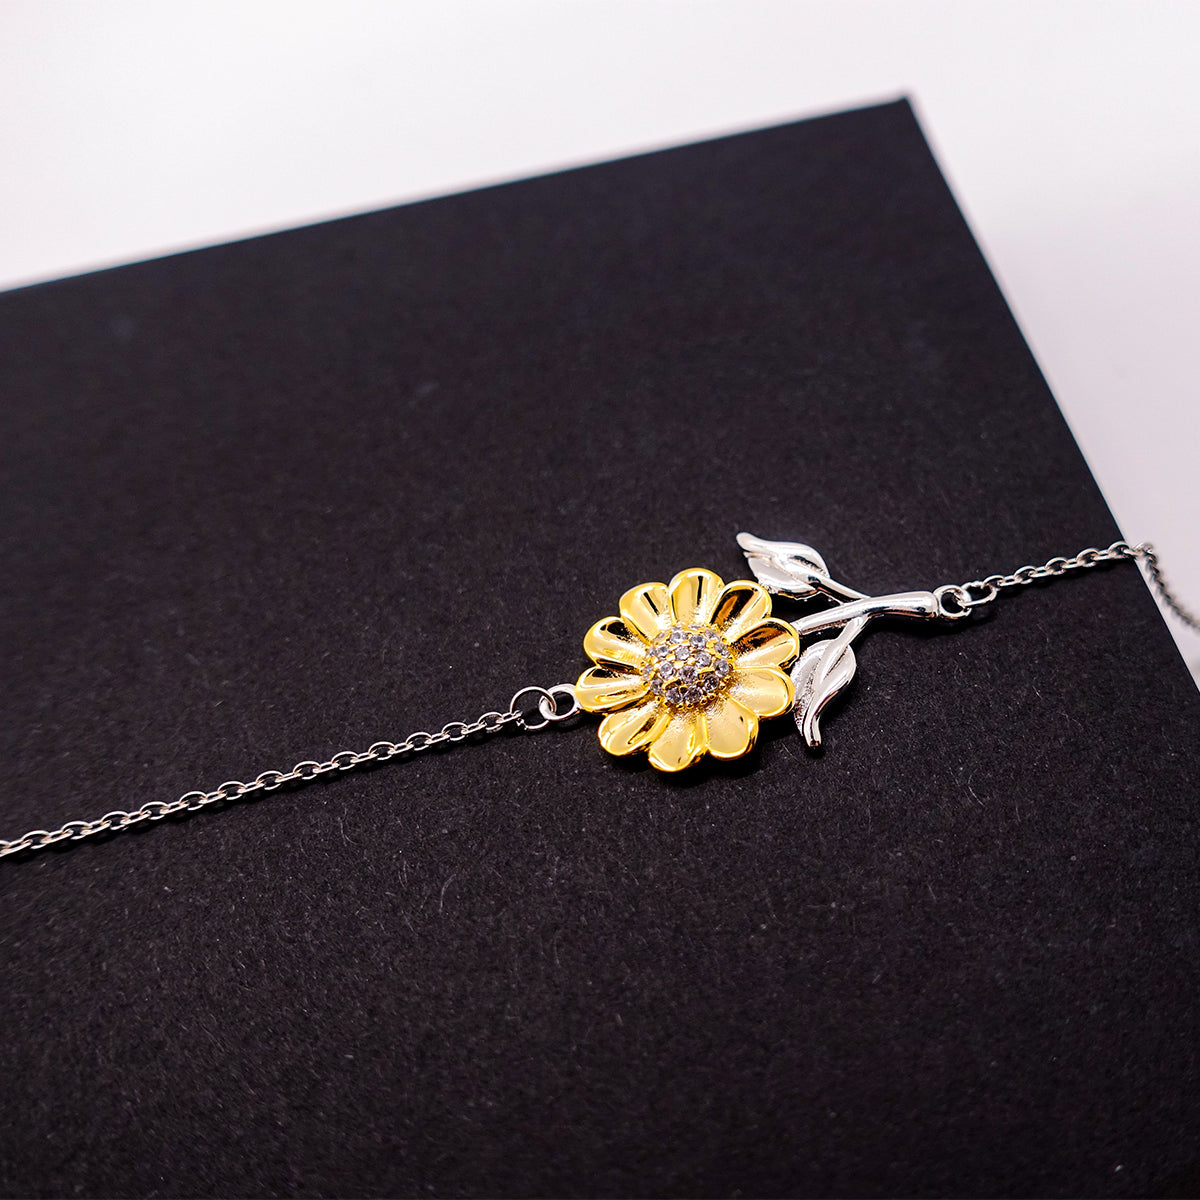 Engraved Sunflower Bracelet for Papa, Always in My Heart Inspirational Gift for Birthday, Christmas, and Graduation - Meaningful Jewelry for Dad with Special Place in Heart